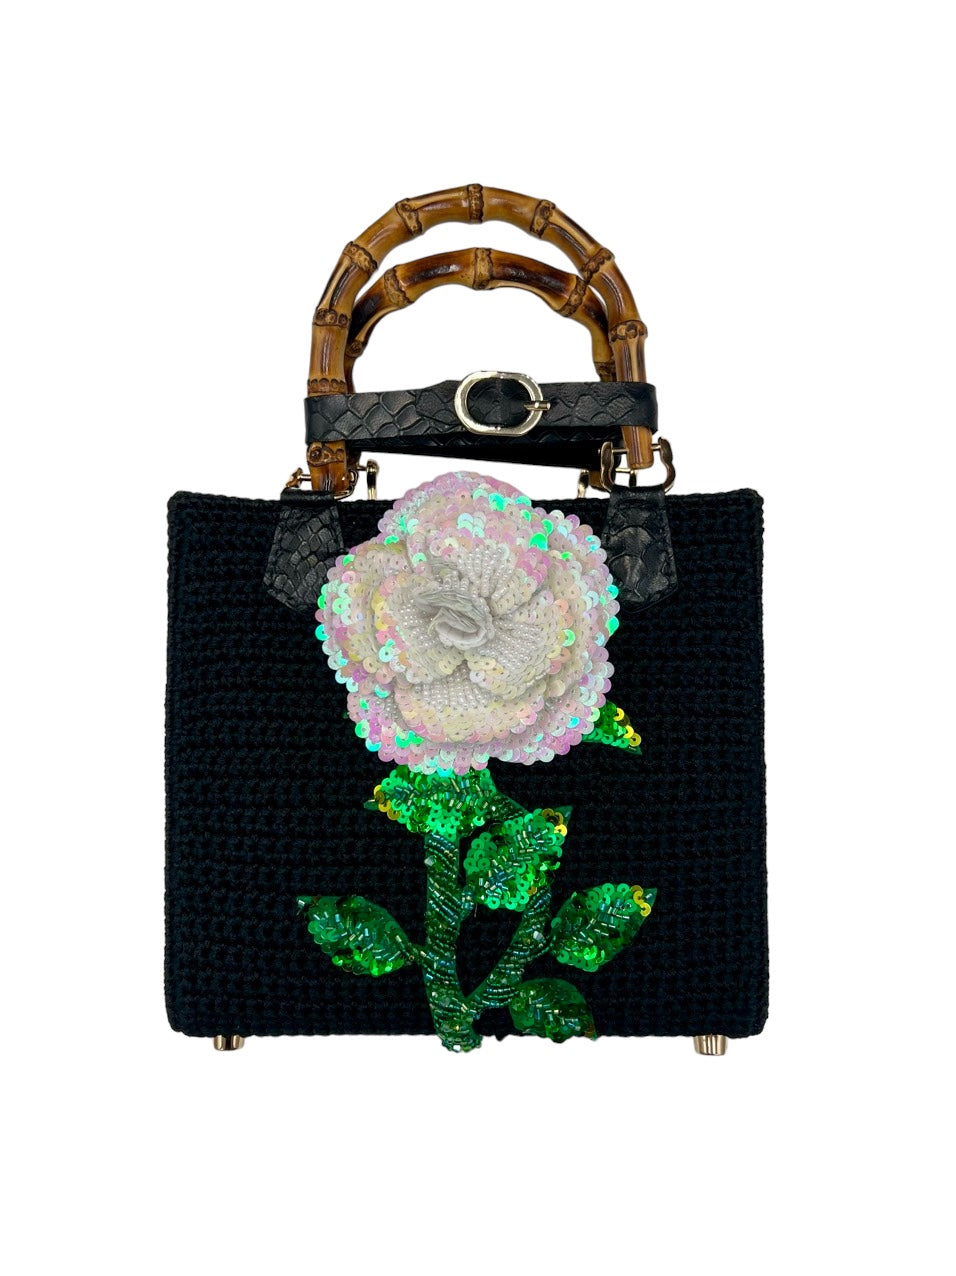 "A Fragile Flower" Collection - Rose Hand Bag in White